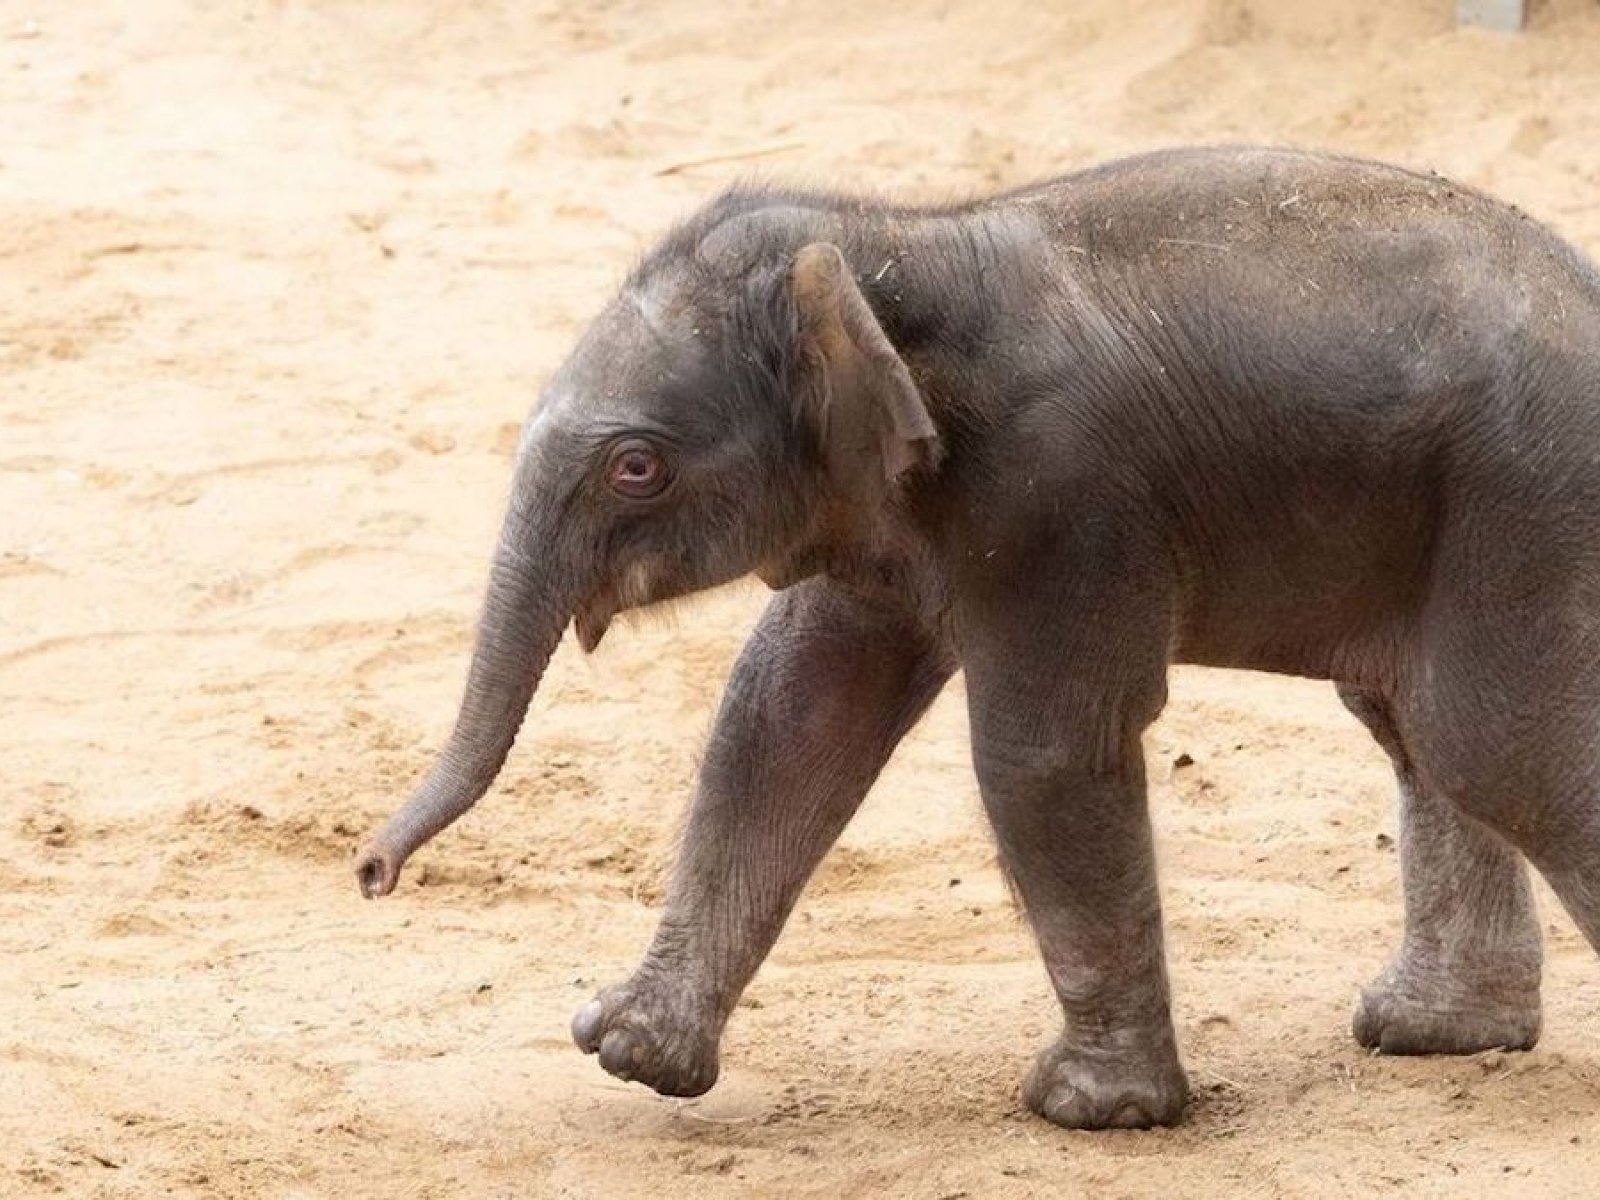 Baby Elephant Sticks Close to Mom in Adorable Video